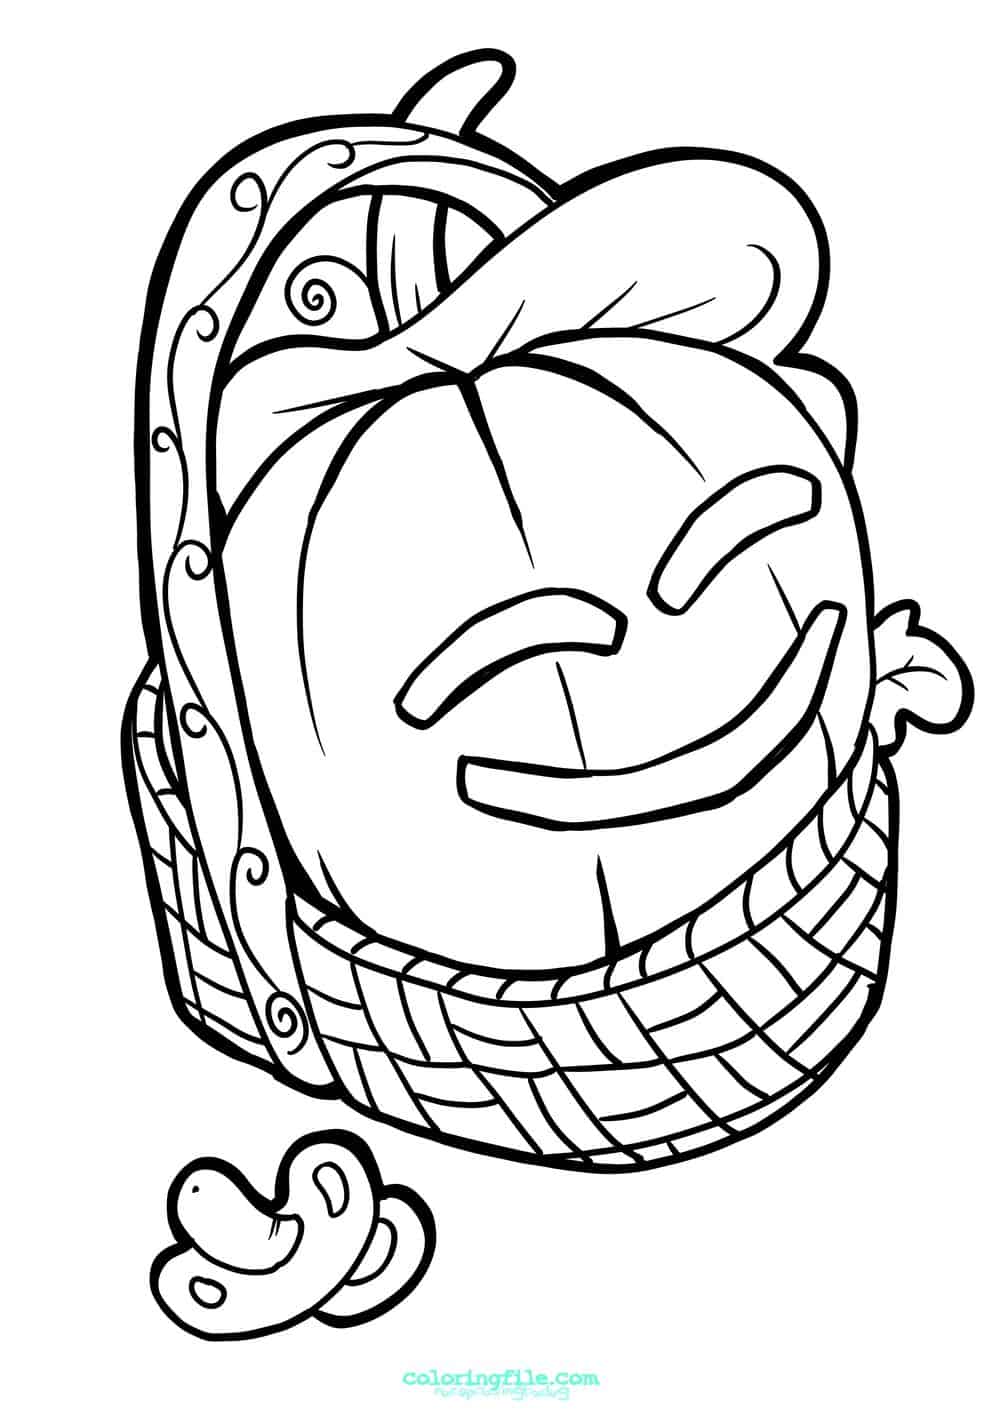 Halloween baby pumpkin coloring pages